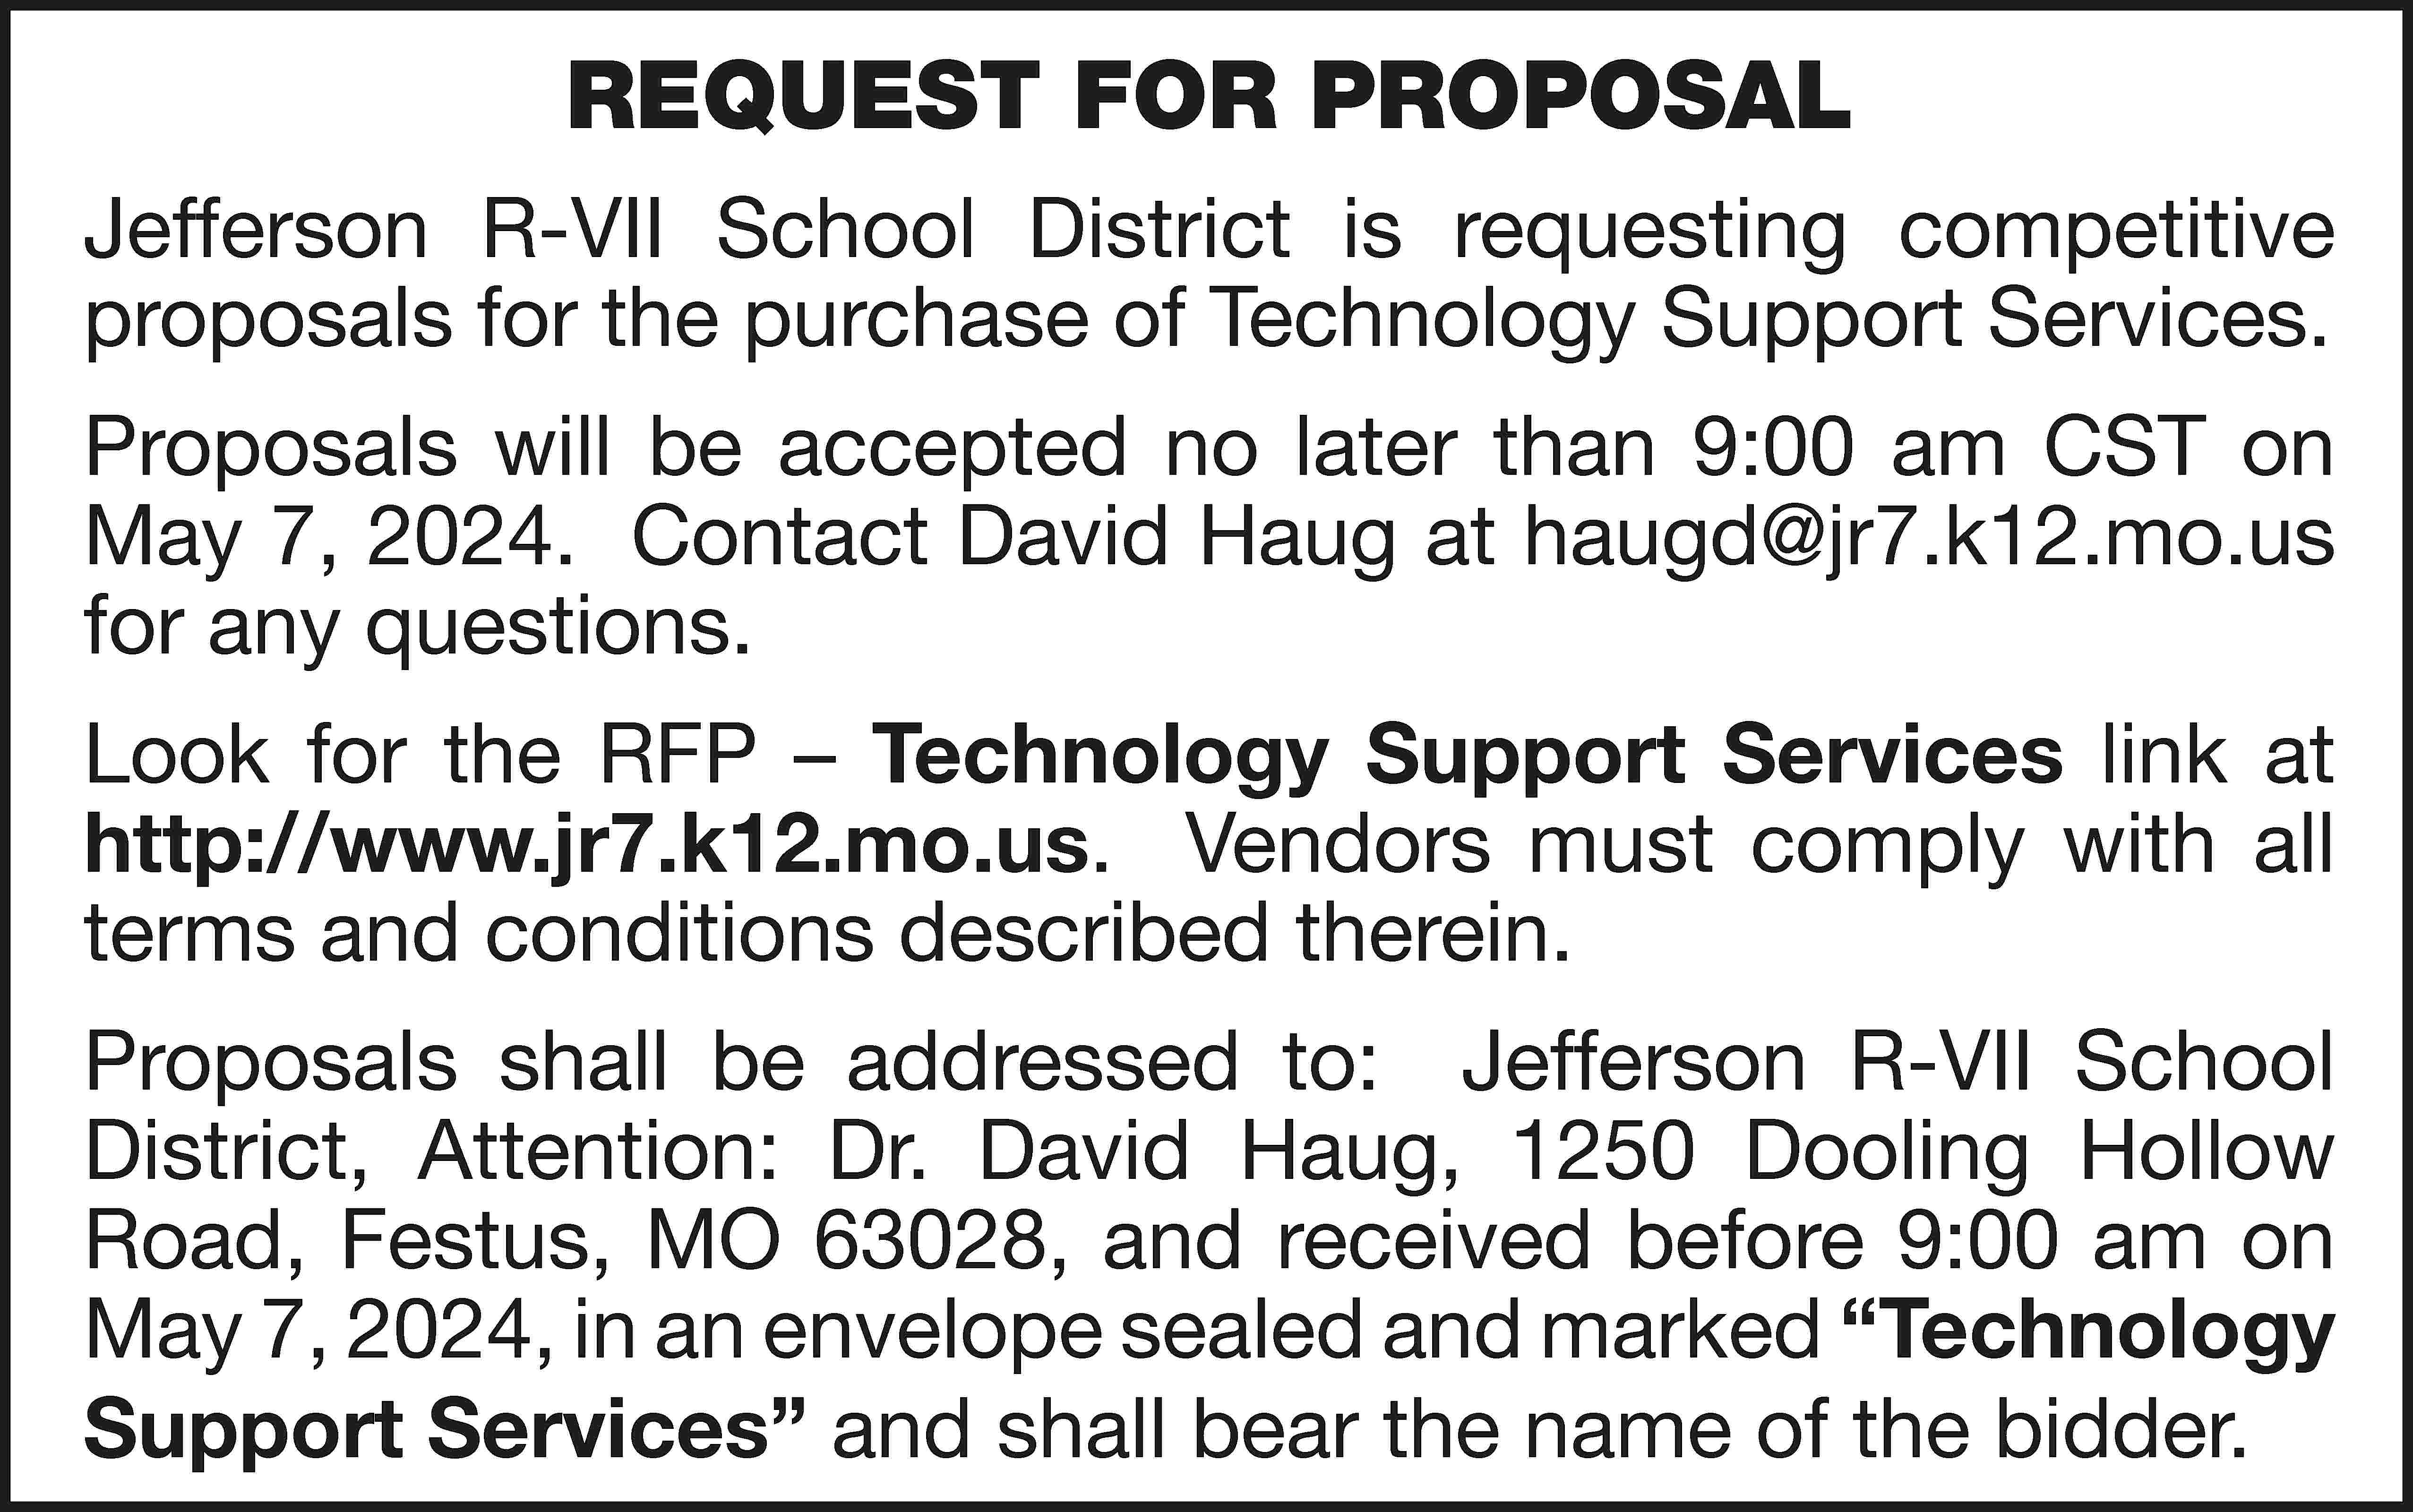 REQUEST FOR PROPOSAL Jefferson R-VII  REQUEST FOR PROPOSAL Jefferson R-VII School District is requesting competitive proposals for the purchase of Technology Support Services. Proposals will be accepted no later than 9:00 am CST on May 7, 2024. Contact David Haug at haugd@jr7.k12.mo.us for any questions. Look for the RFP – Technology Support Services link at http://www.jr7.k12.mo.us. Vendors must comply with all terms and conditions described therein. Proposals shall be addressed to: Jefferson R-VII School District, Attention: Dr. David Haug, 1250 Dooling Hollow Road, Festus, MO 63028, and received before 9:00 am on May 7, 2024, in an envelope sealed and marked “Technology Support Services” and shall bear the name of the bidder.